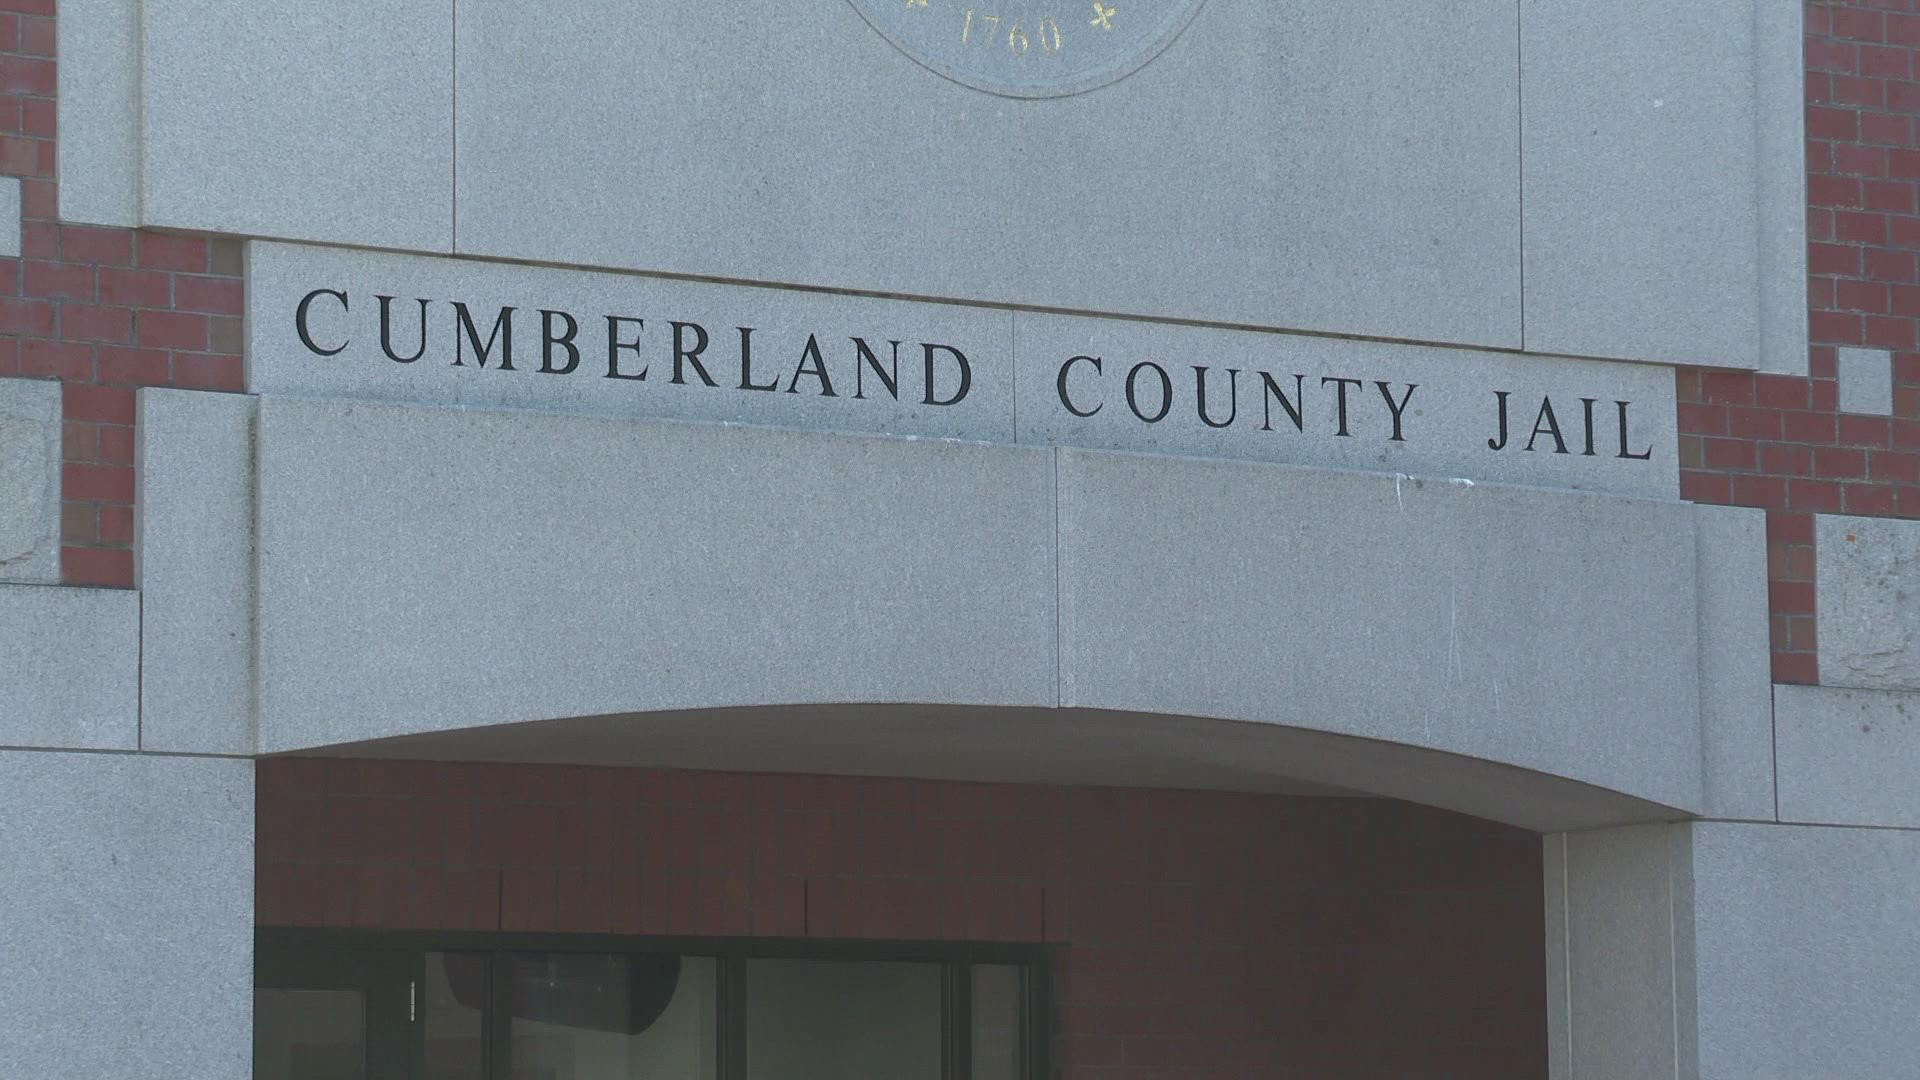 The Cumberland County Sheriff's Office says that 30-year-old James Mannion of Portland was found unresponsive in his cell on Sunday morning.